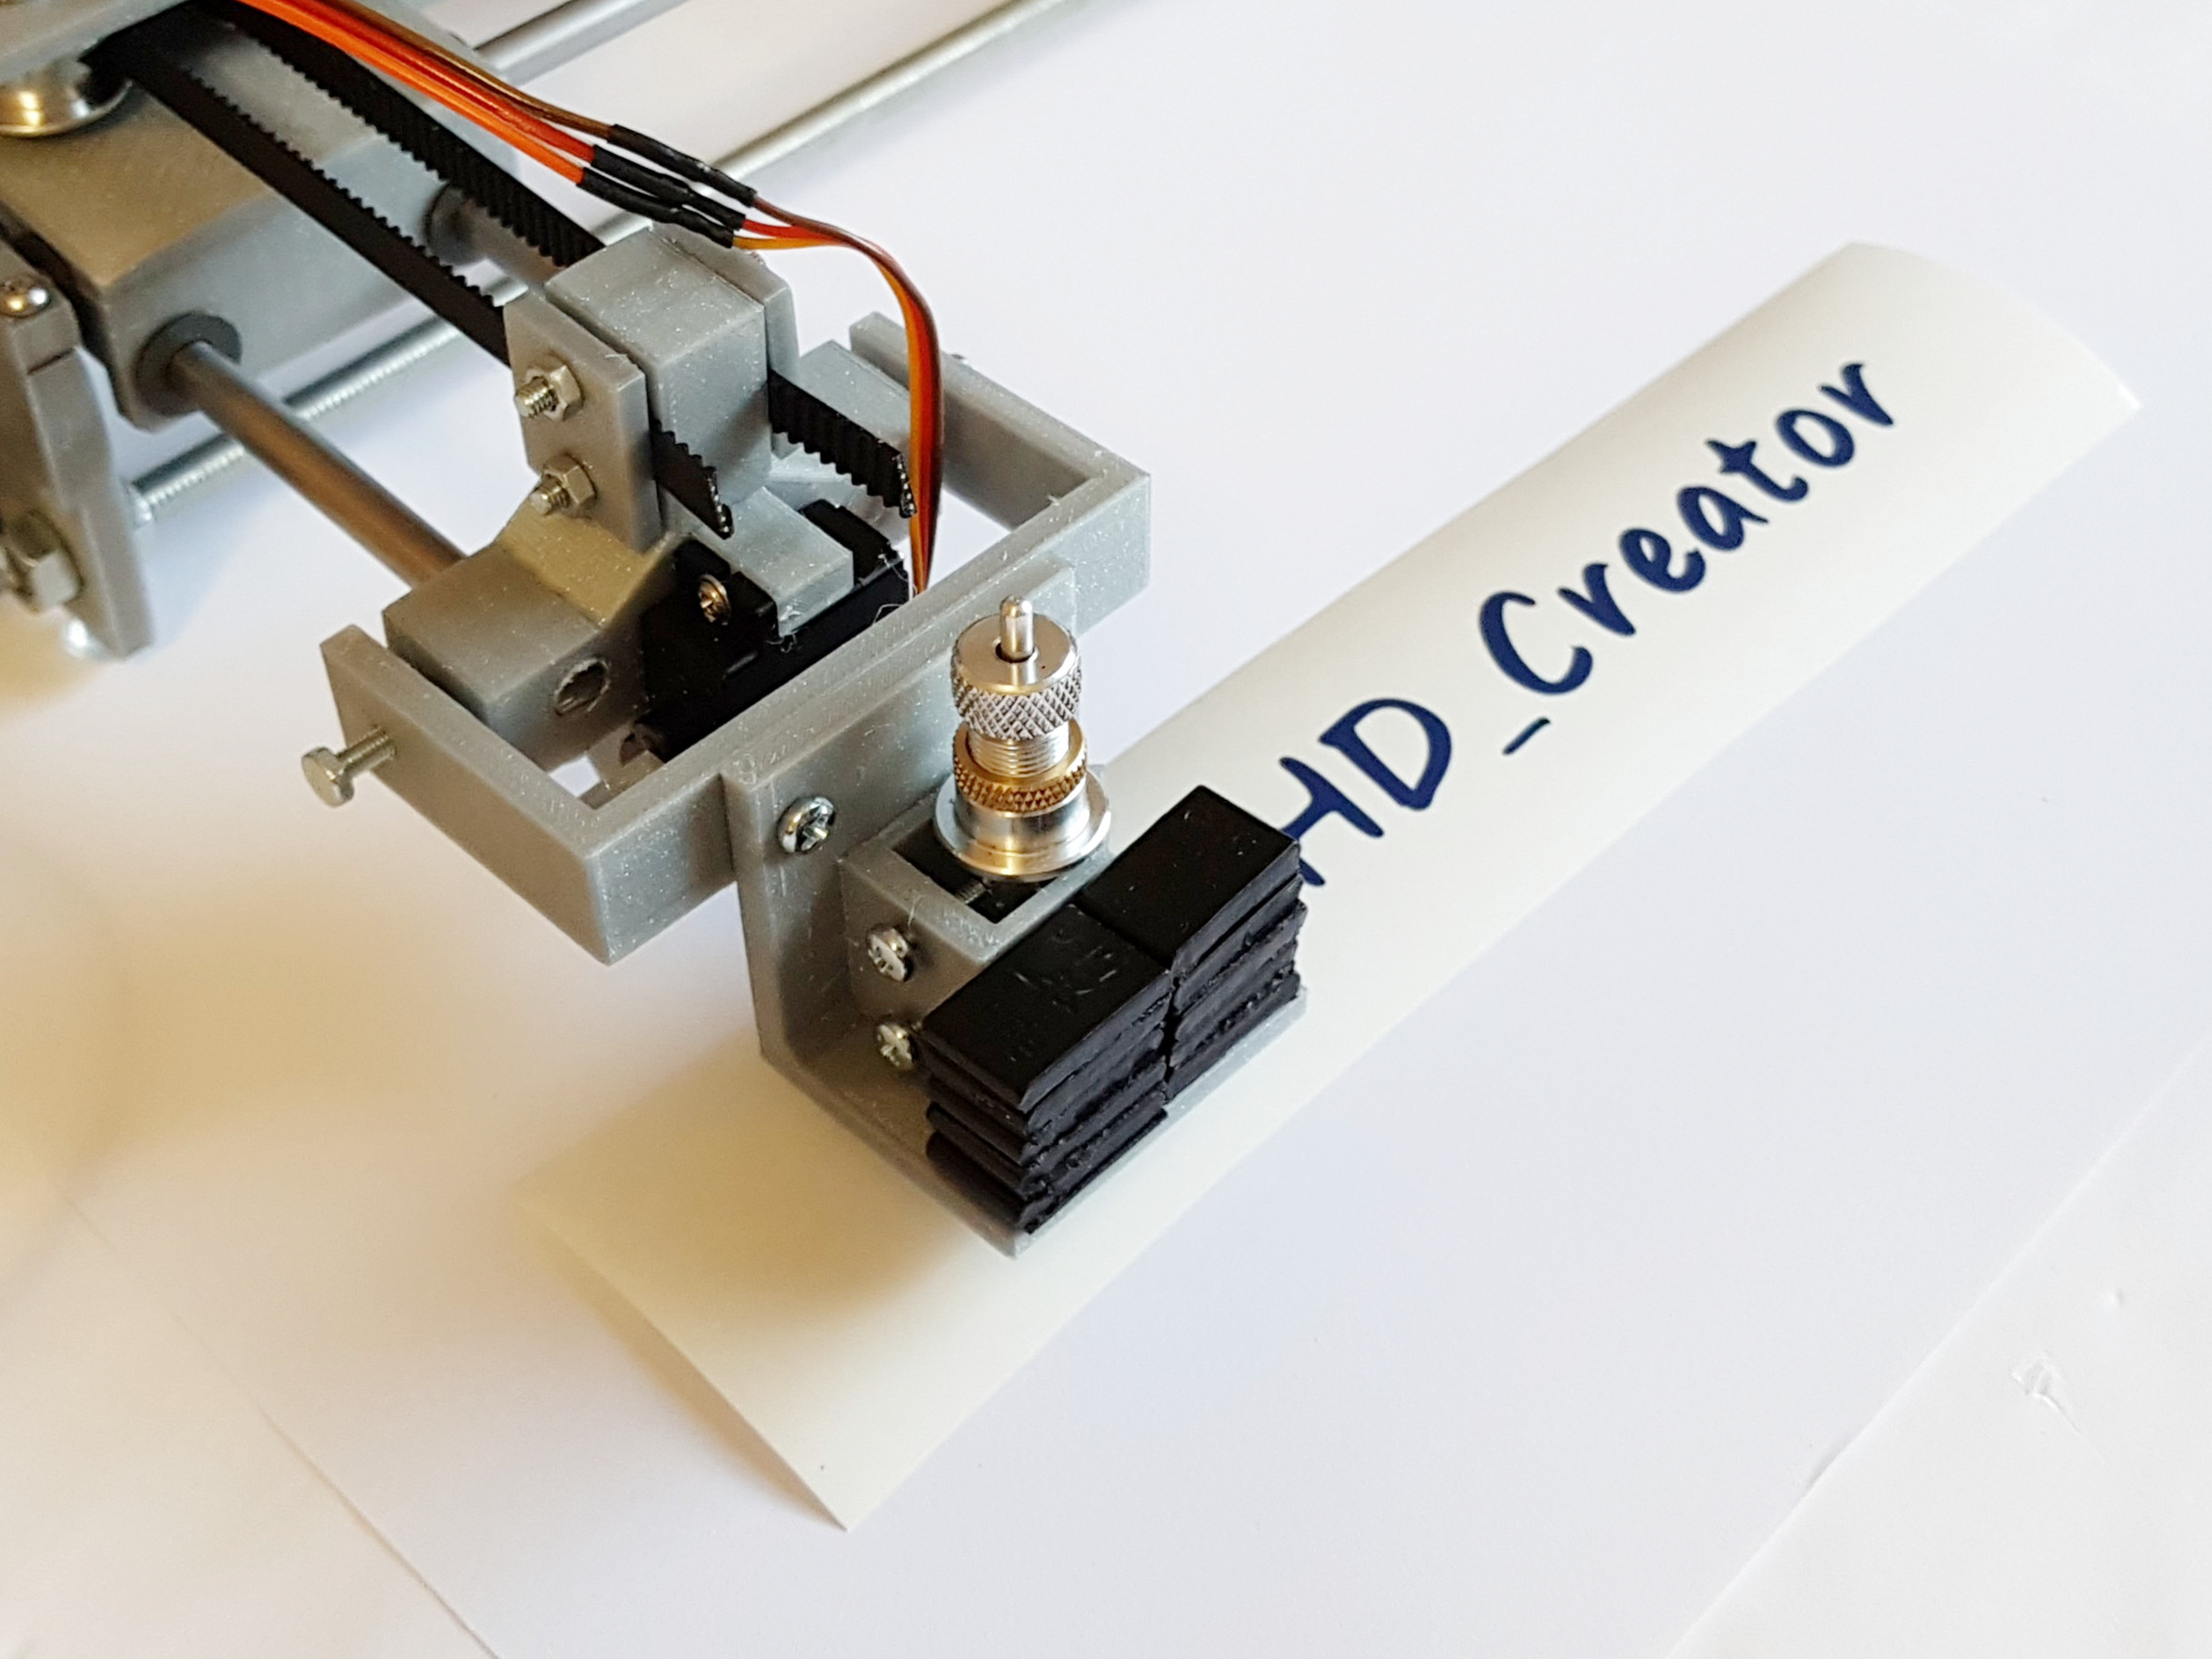 Vinyl cutter attachment for 3D printed drawing machine